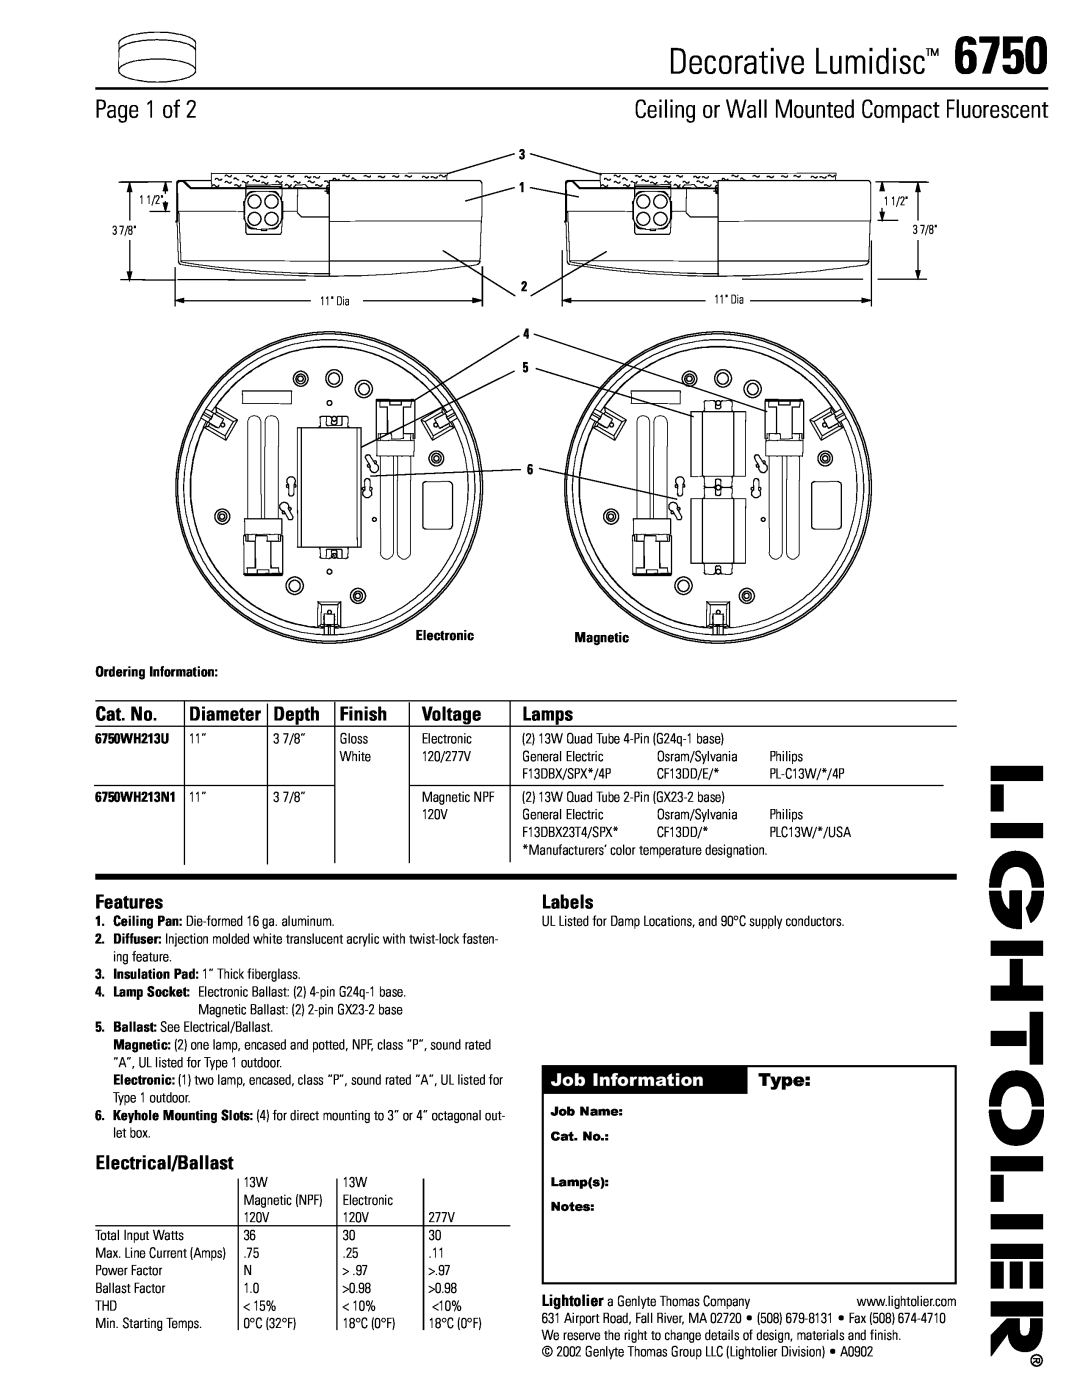 Lightolier 6750 manual Decorative Lumidisc, Page 1 of, Ceiling or Wall Mounted Compact Fluorescent, Diameter, Type, Depth 